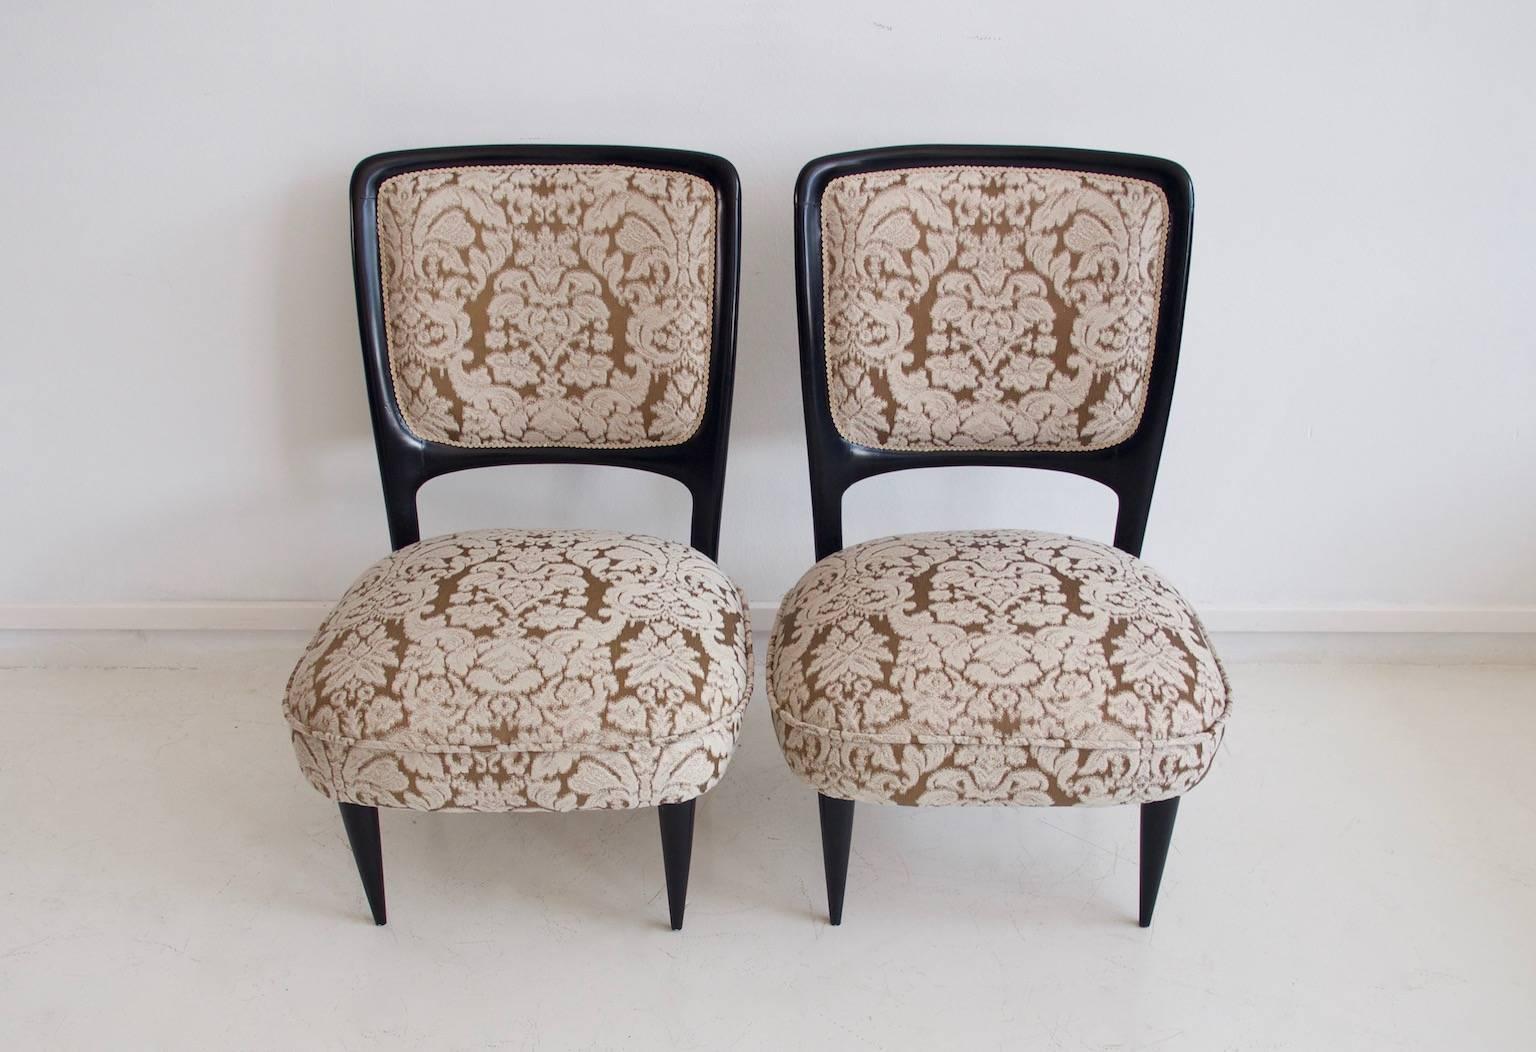 Pair of Italian chairs from circa 1950s. Frame of mahogany wood, renewed padded seats and back. The chairs are handmade and the dimensions of each of them are slightly different for that reason. The dimensions of the small chair are 60 cm depth x 59